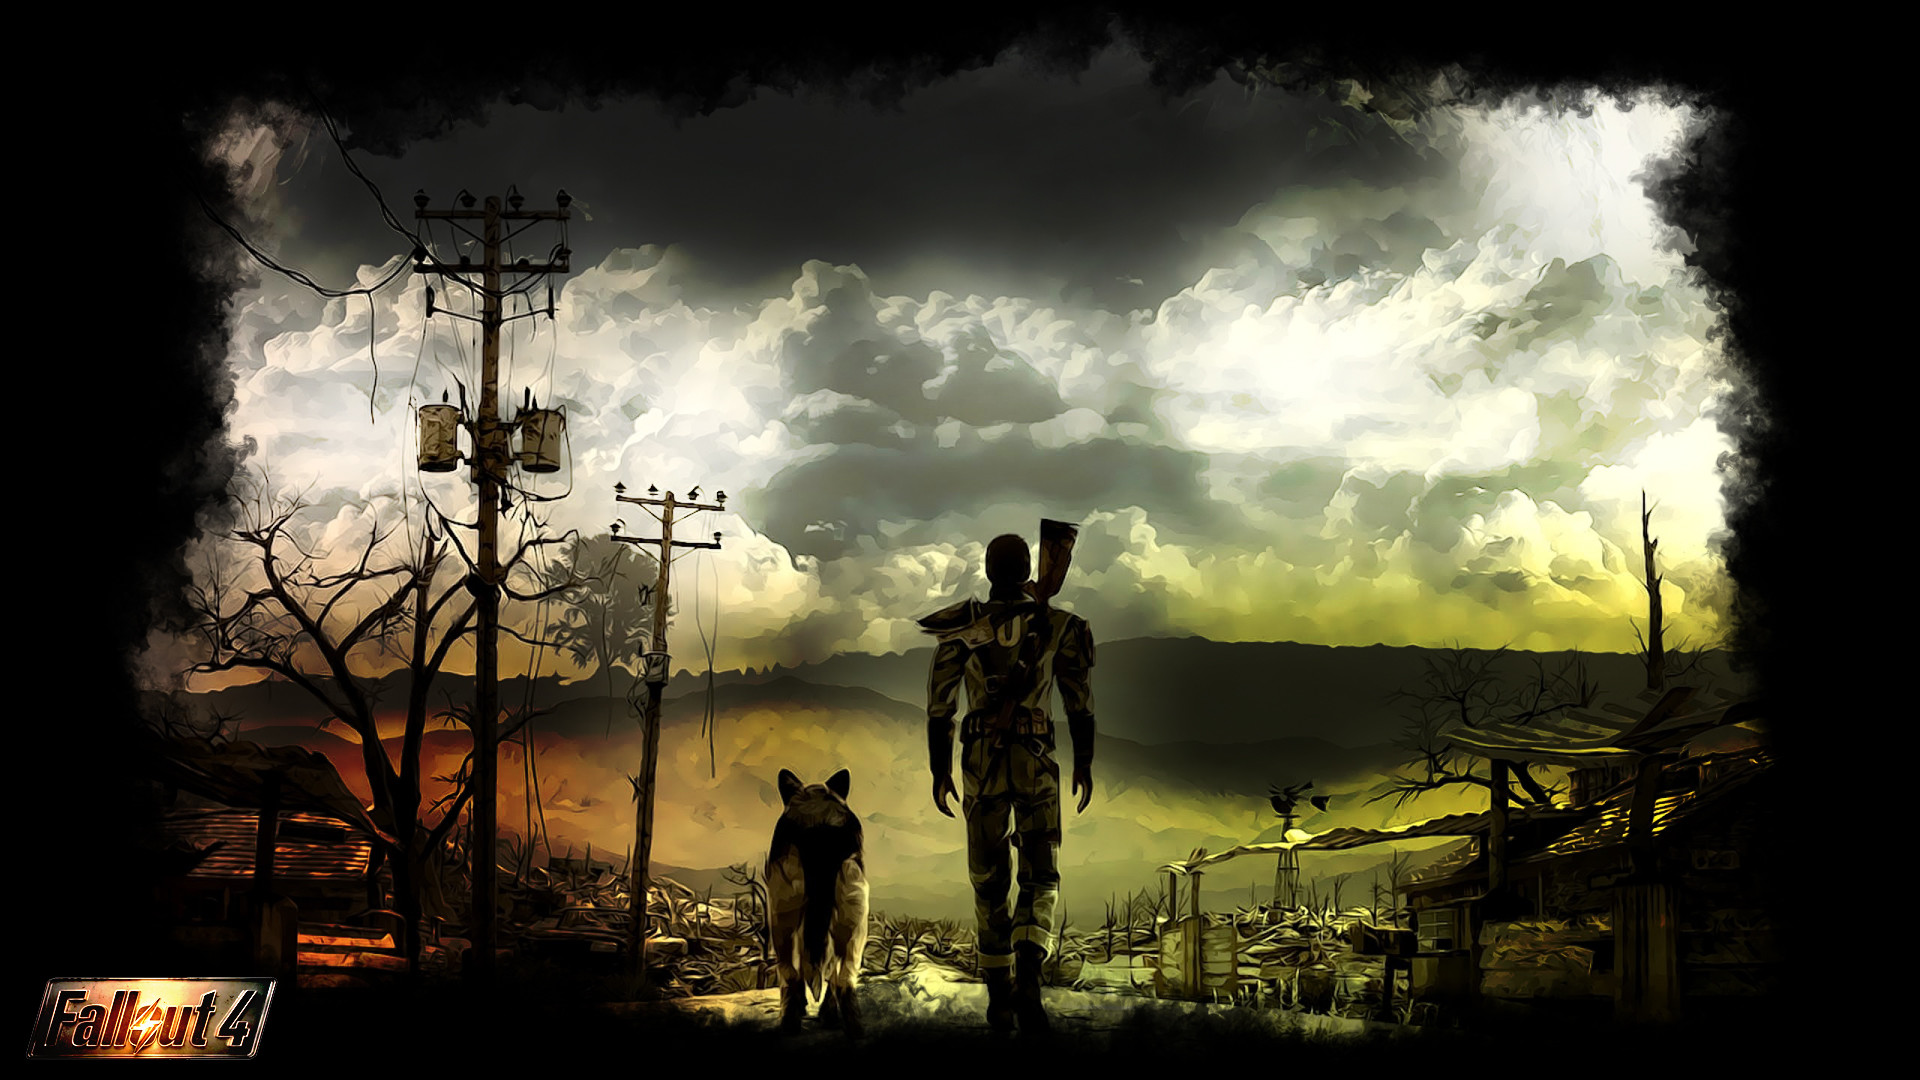 Fallout 4 Wallpapers 35 Awesome Images for Your Computer